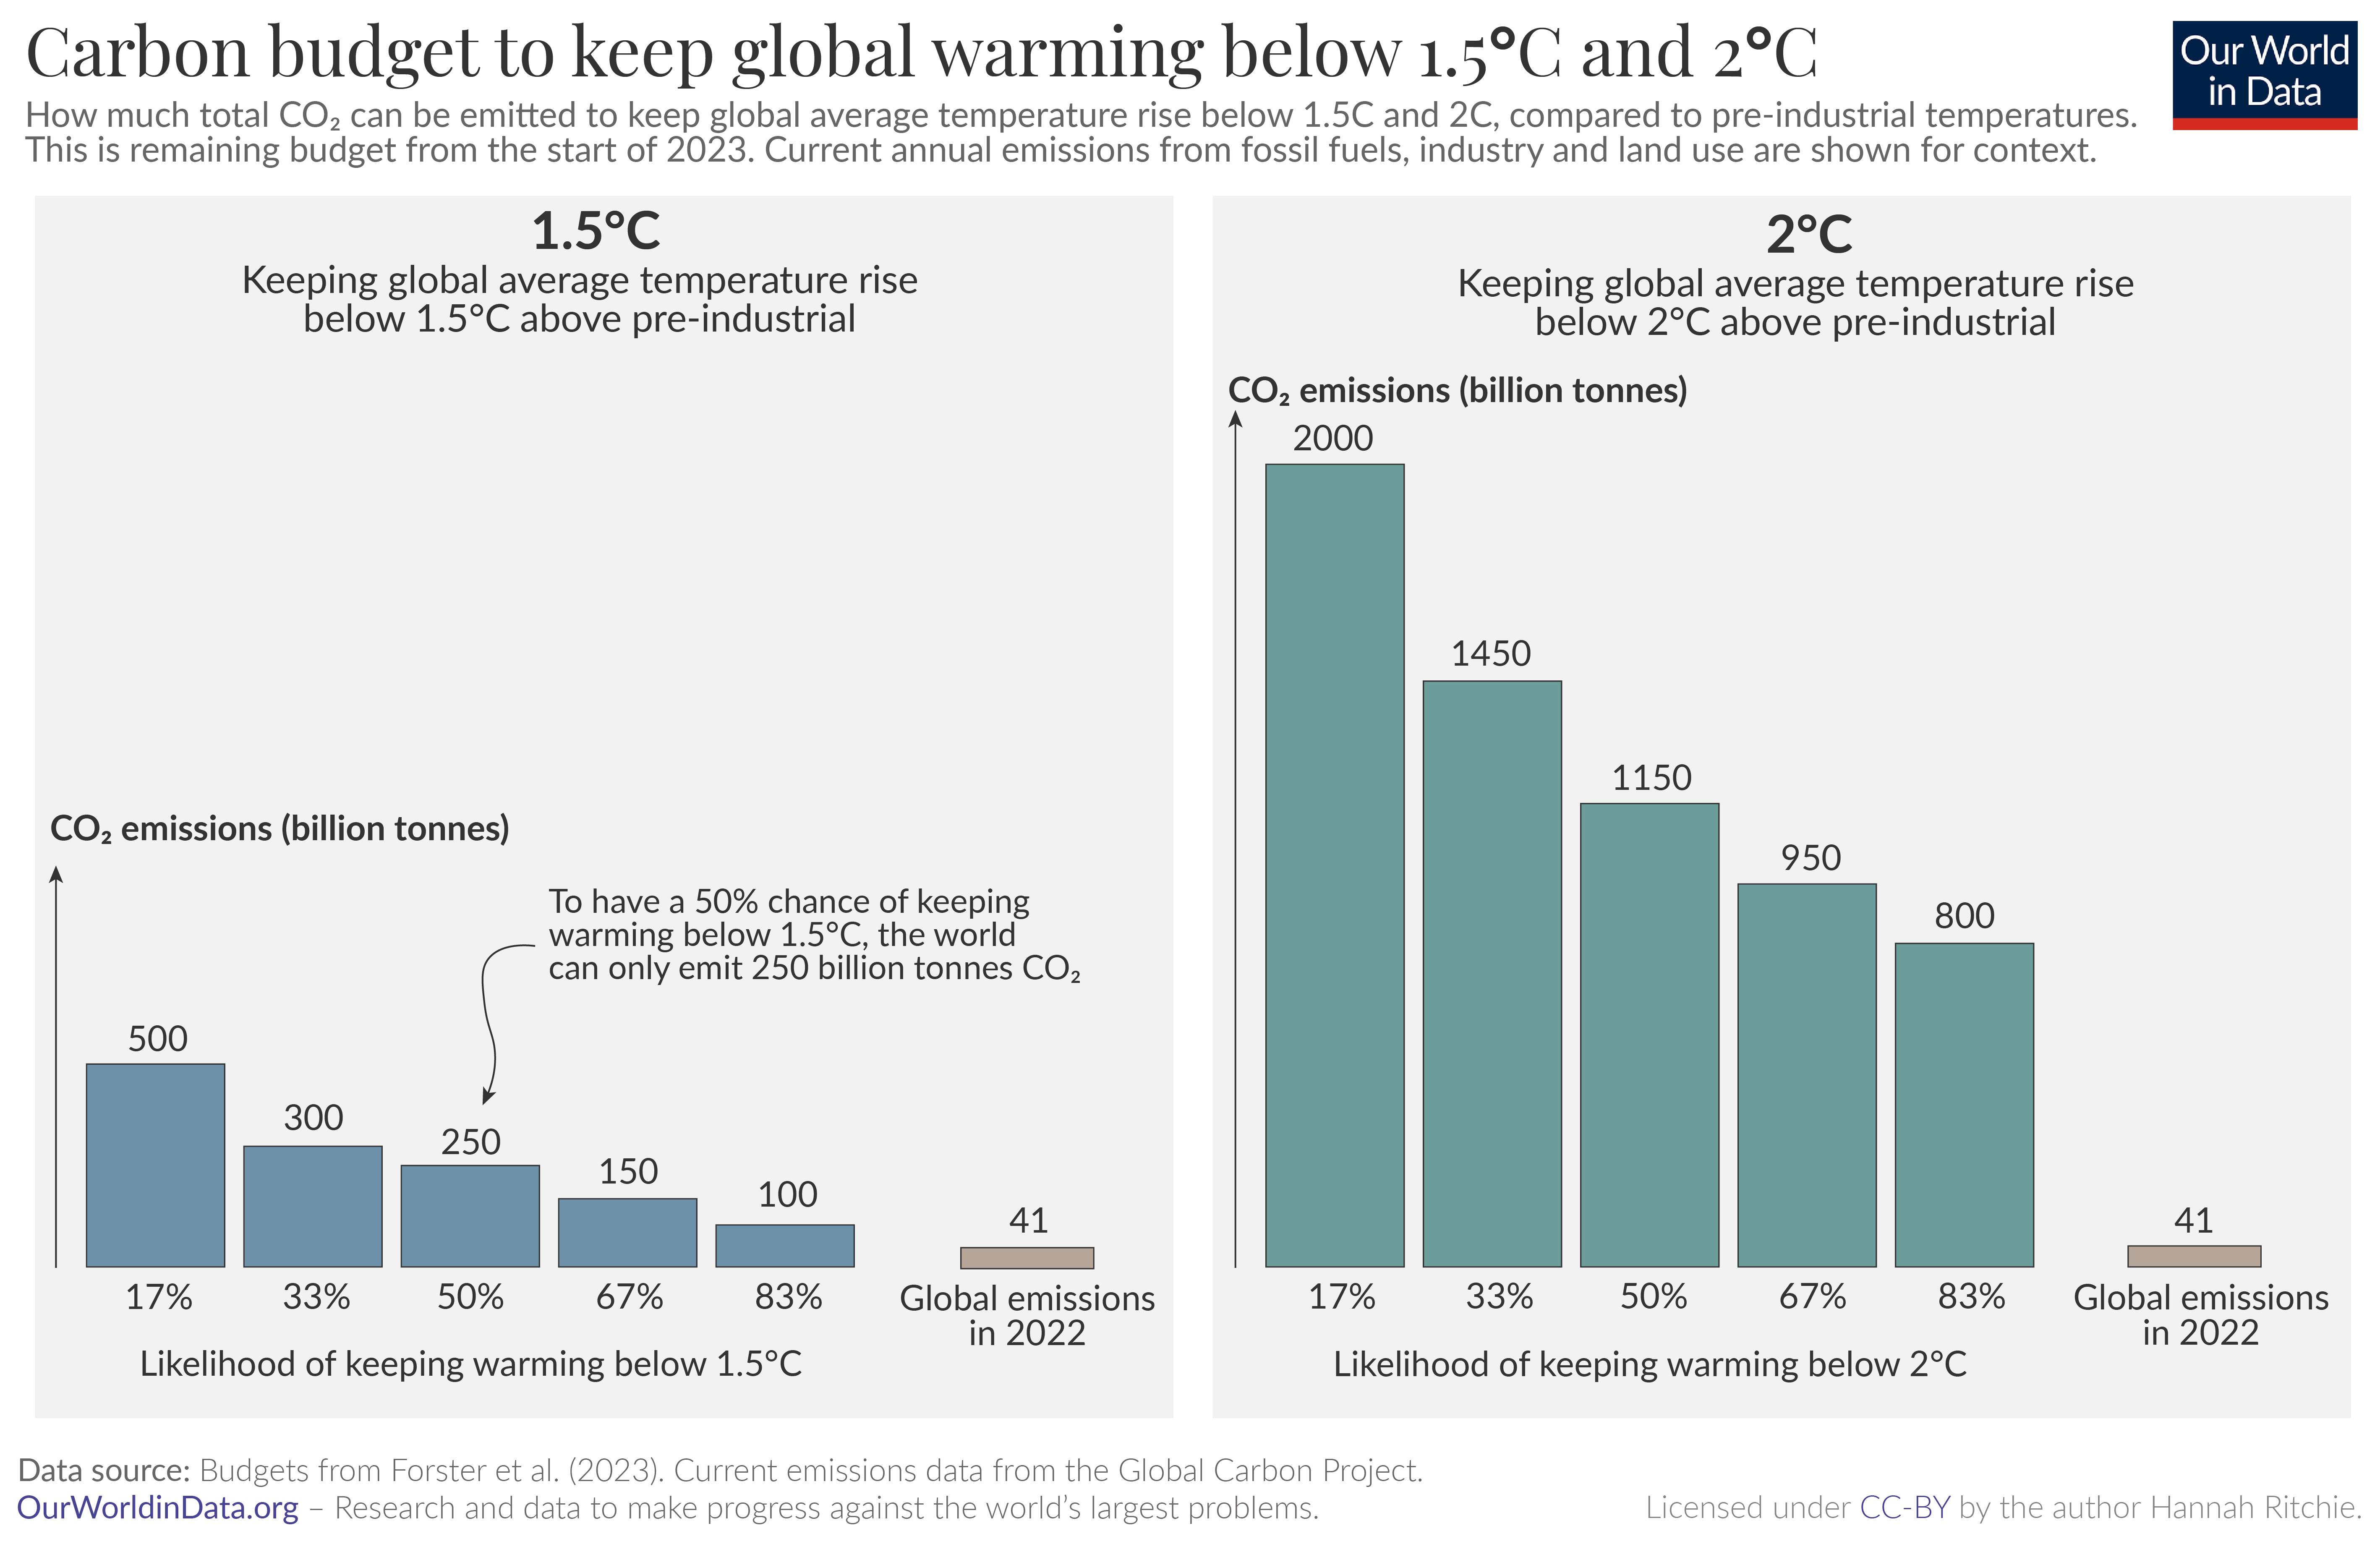 Bar charts showing the amount of CO2 that can be emitted to keep temperature rise below 1.5C and 2C.